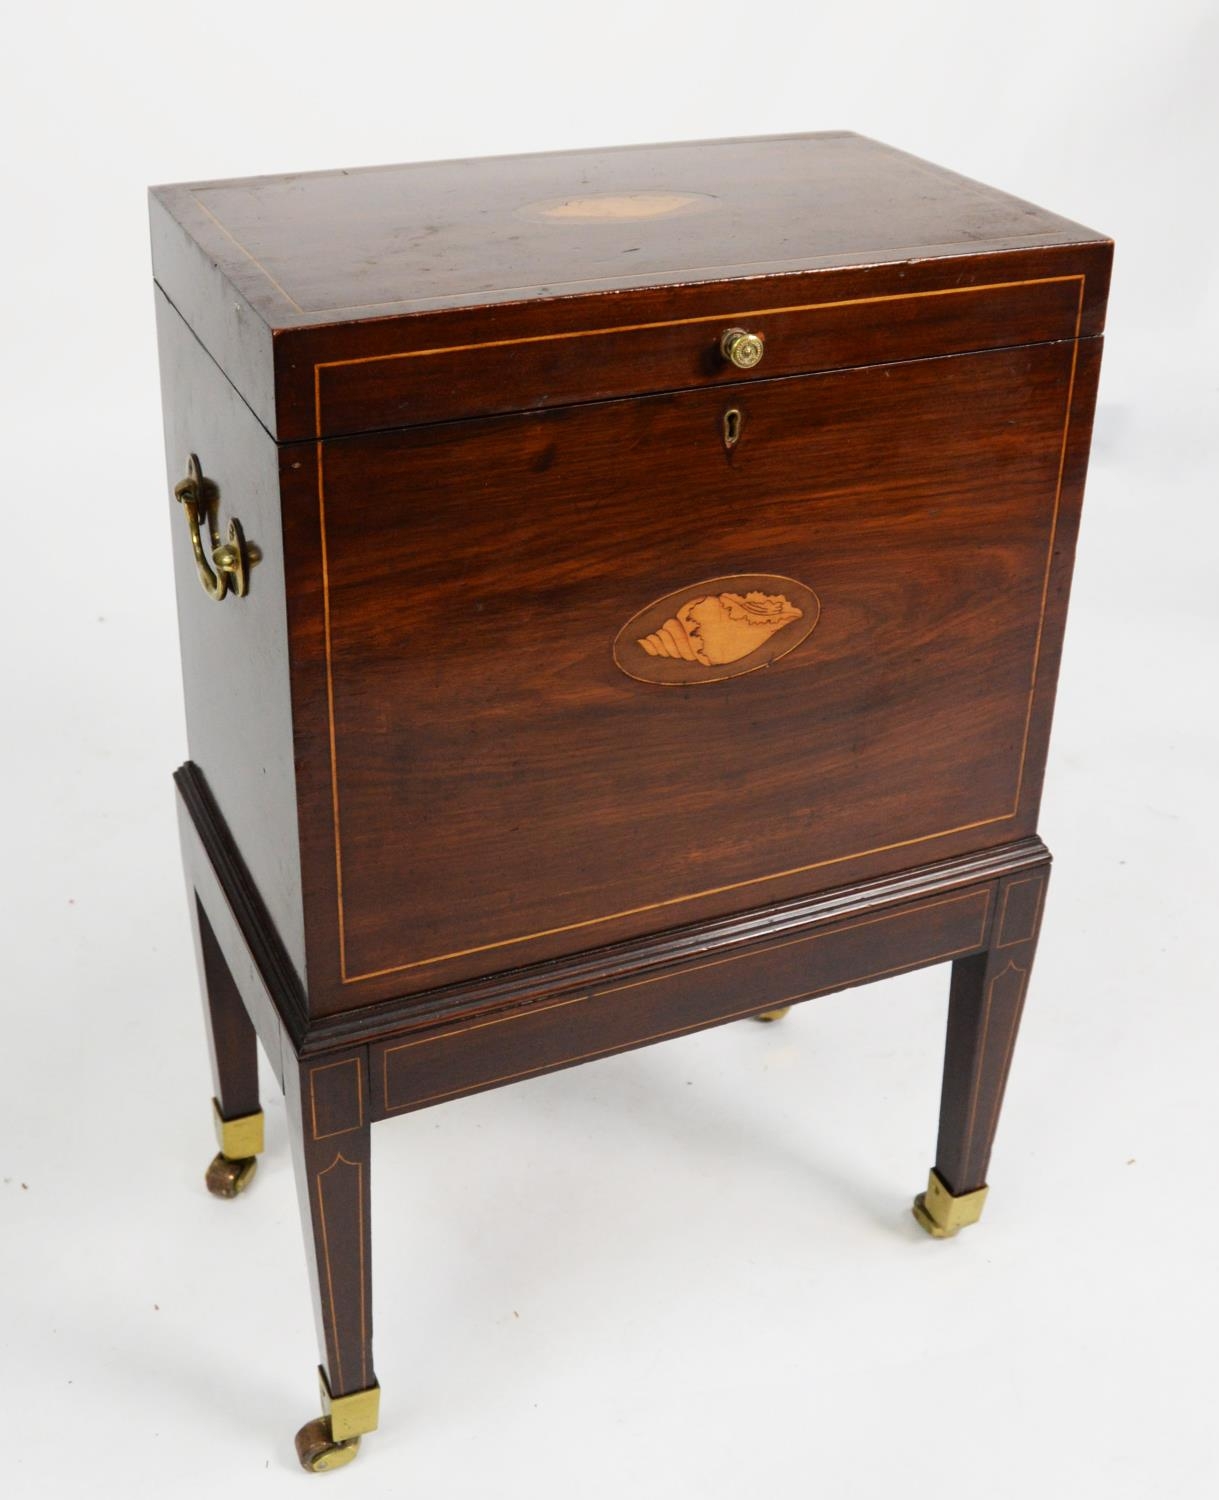 GEORGE III INLAID MAHOGANY CELLARETTE, the oblong top with oval shell inlay, set above a matching